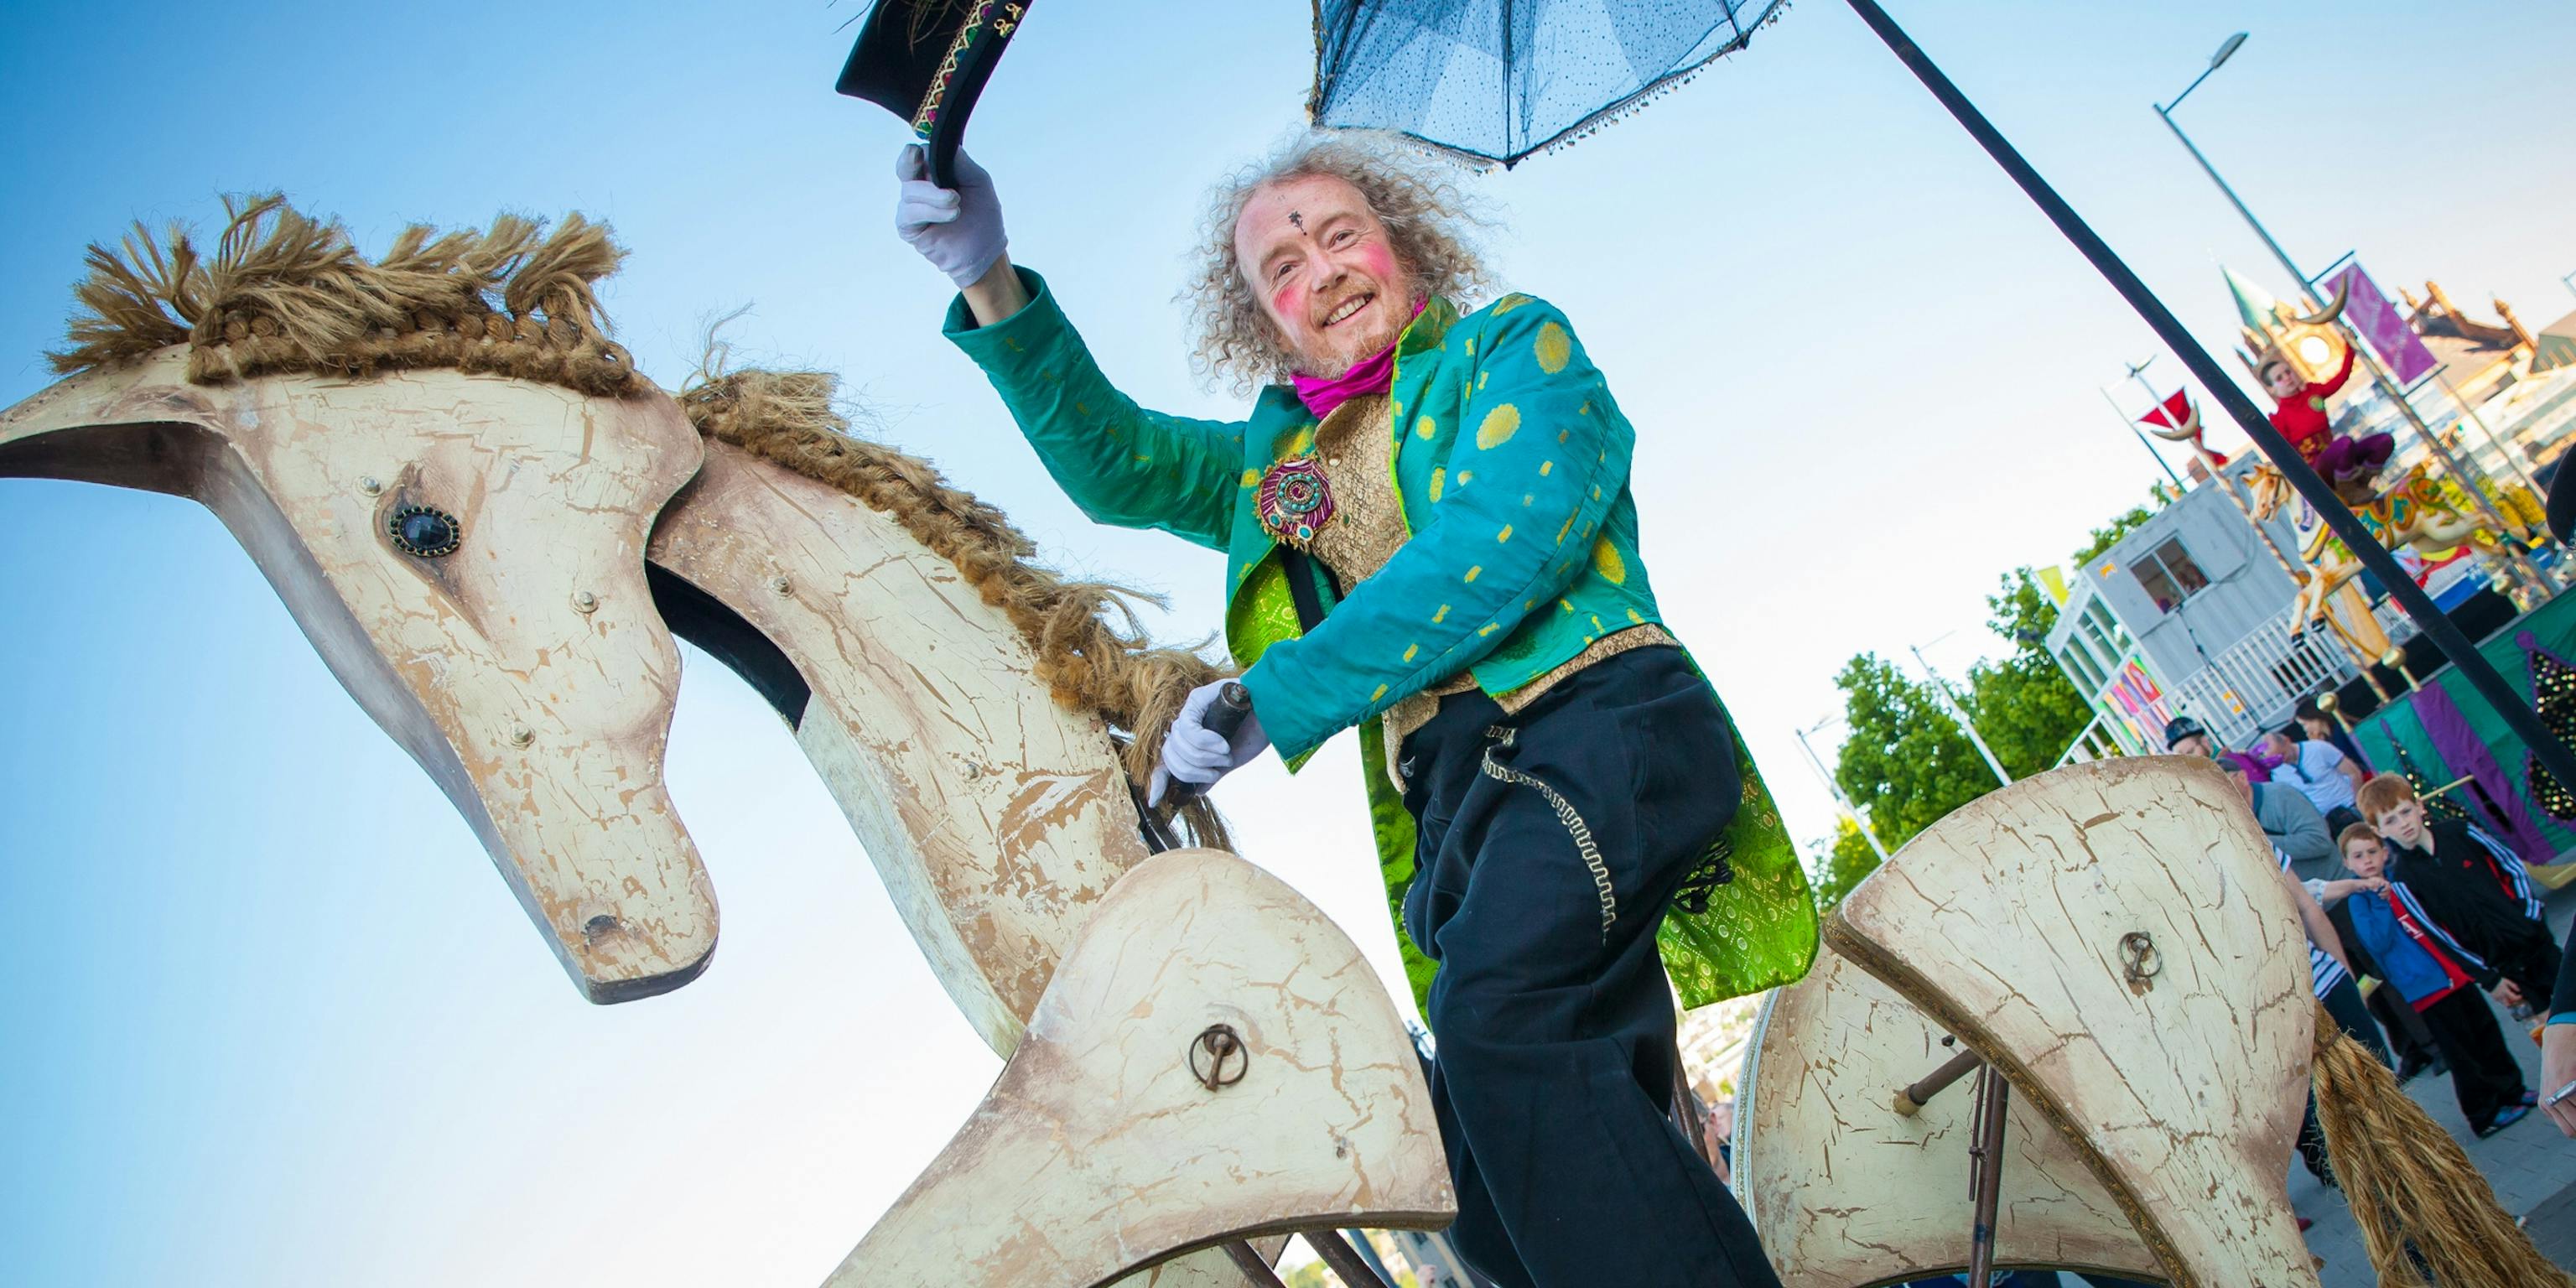 A performer in a green circus-style outfit sitting atop a wooden horse and lifting his hat